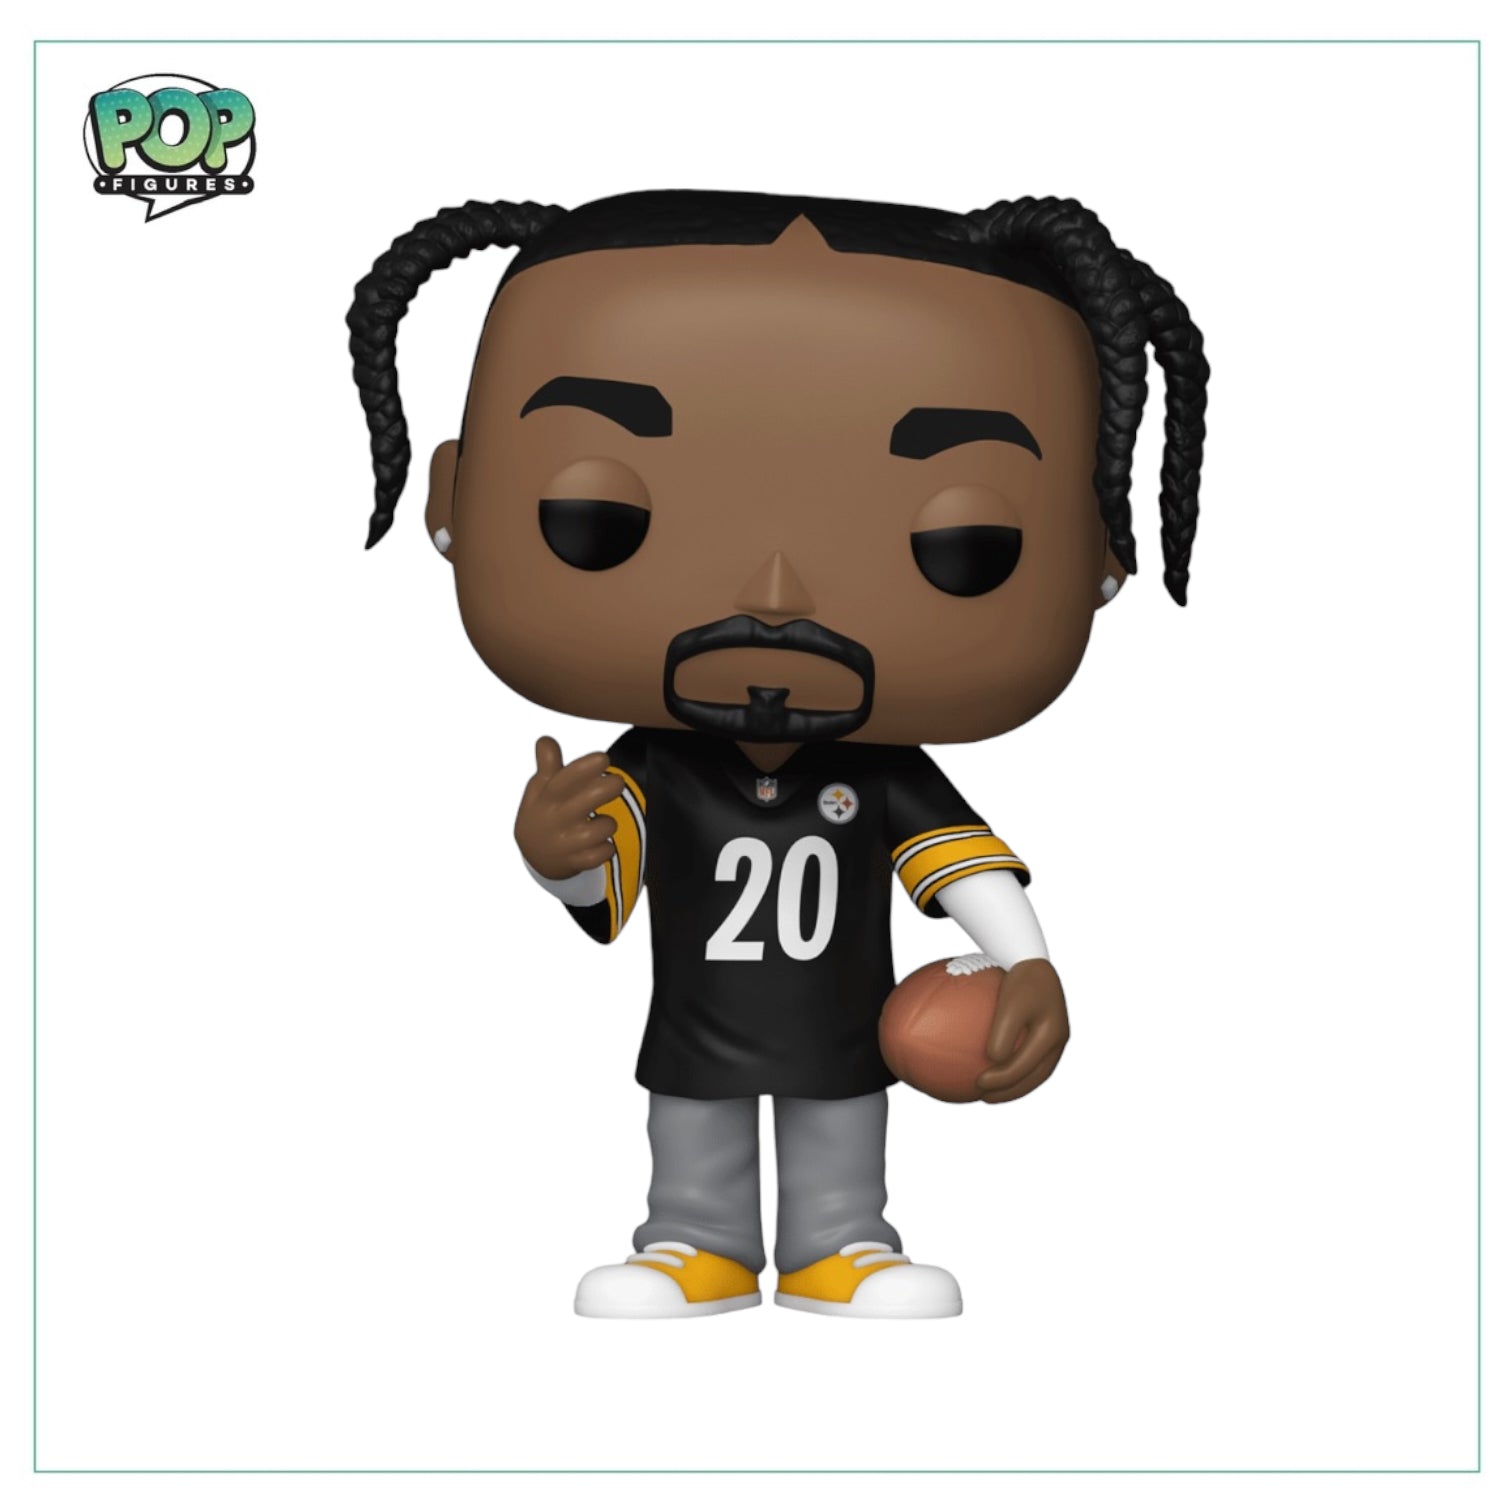 Snoop Dogg #304 (Steelers Jersey) Funko Pop! - Rocks - The Dogg House x Funko Exclusive LE15000 Pcs